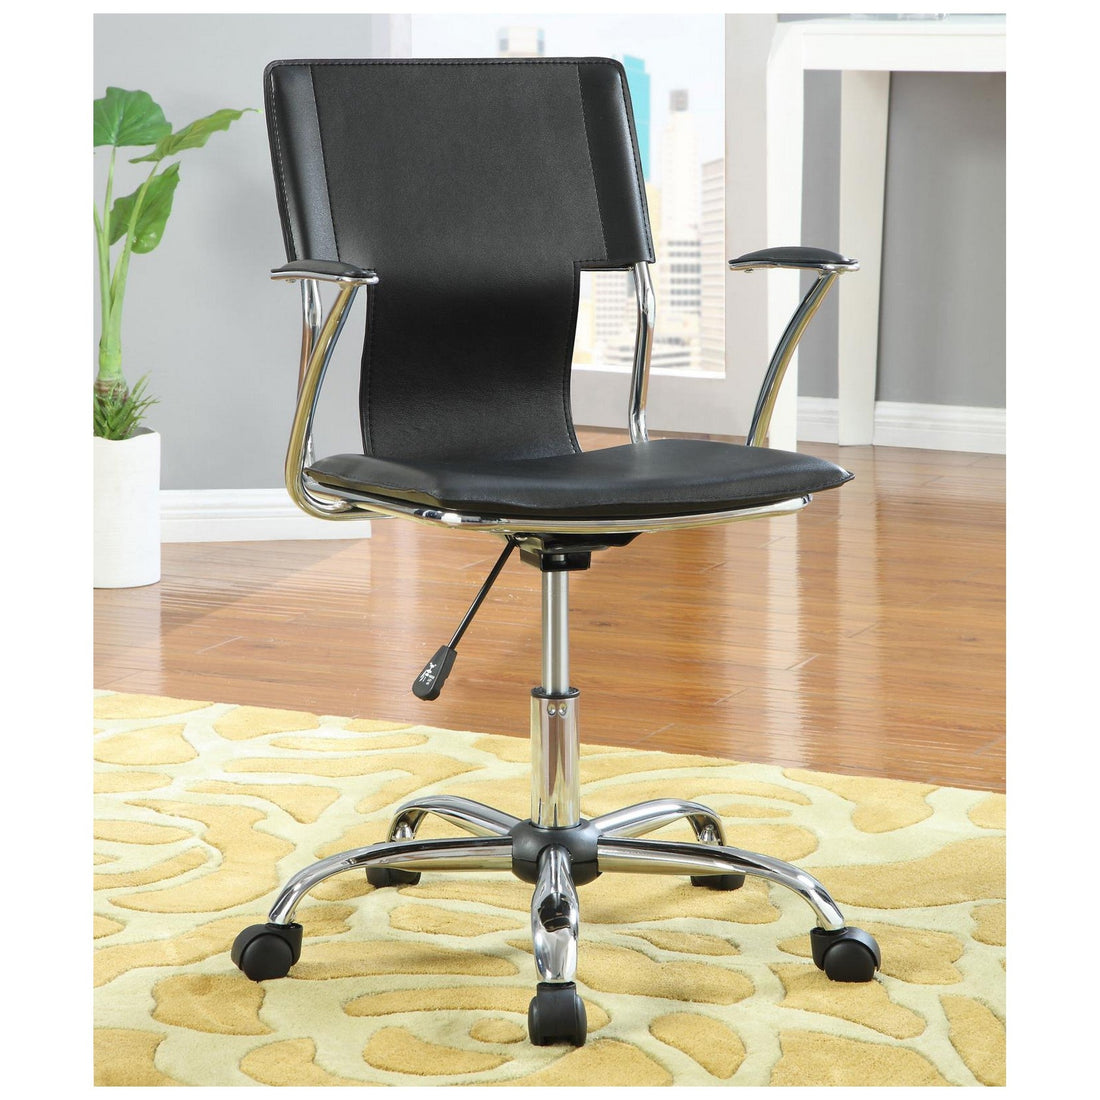 Himari Adjustable Height Office Chair Black and Chrome 800207